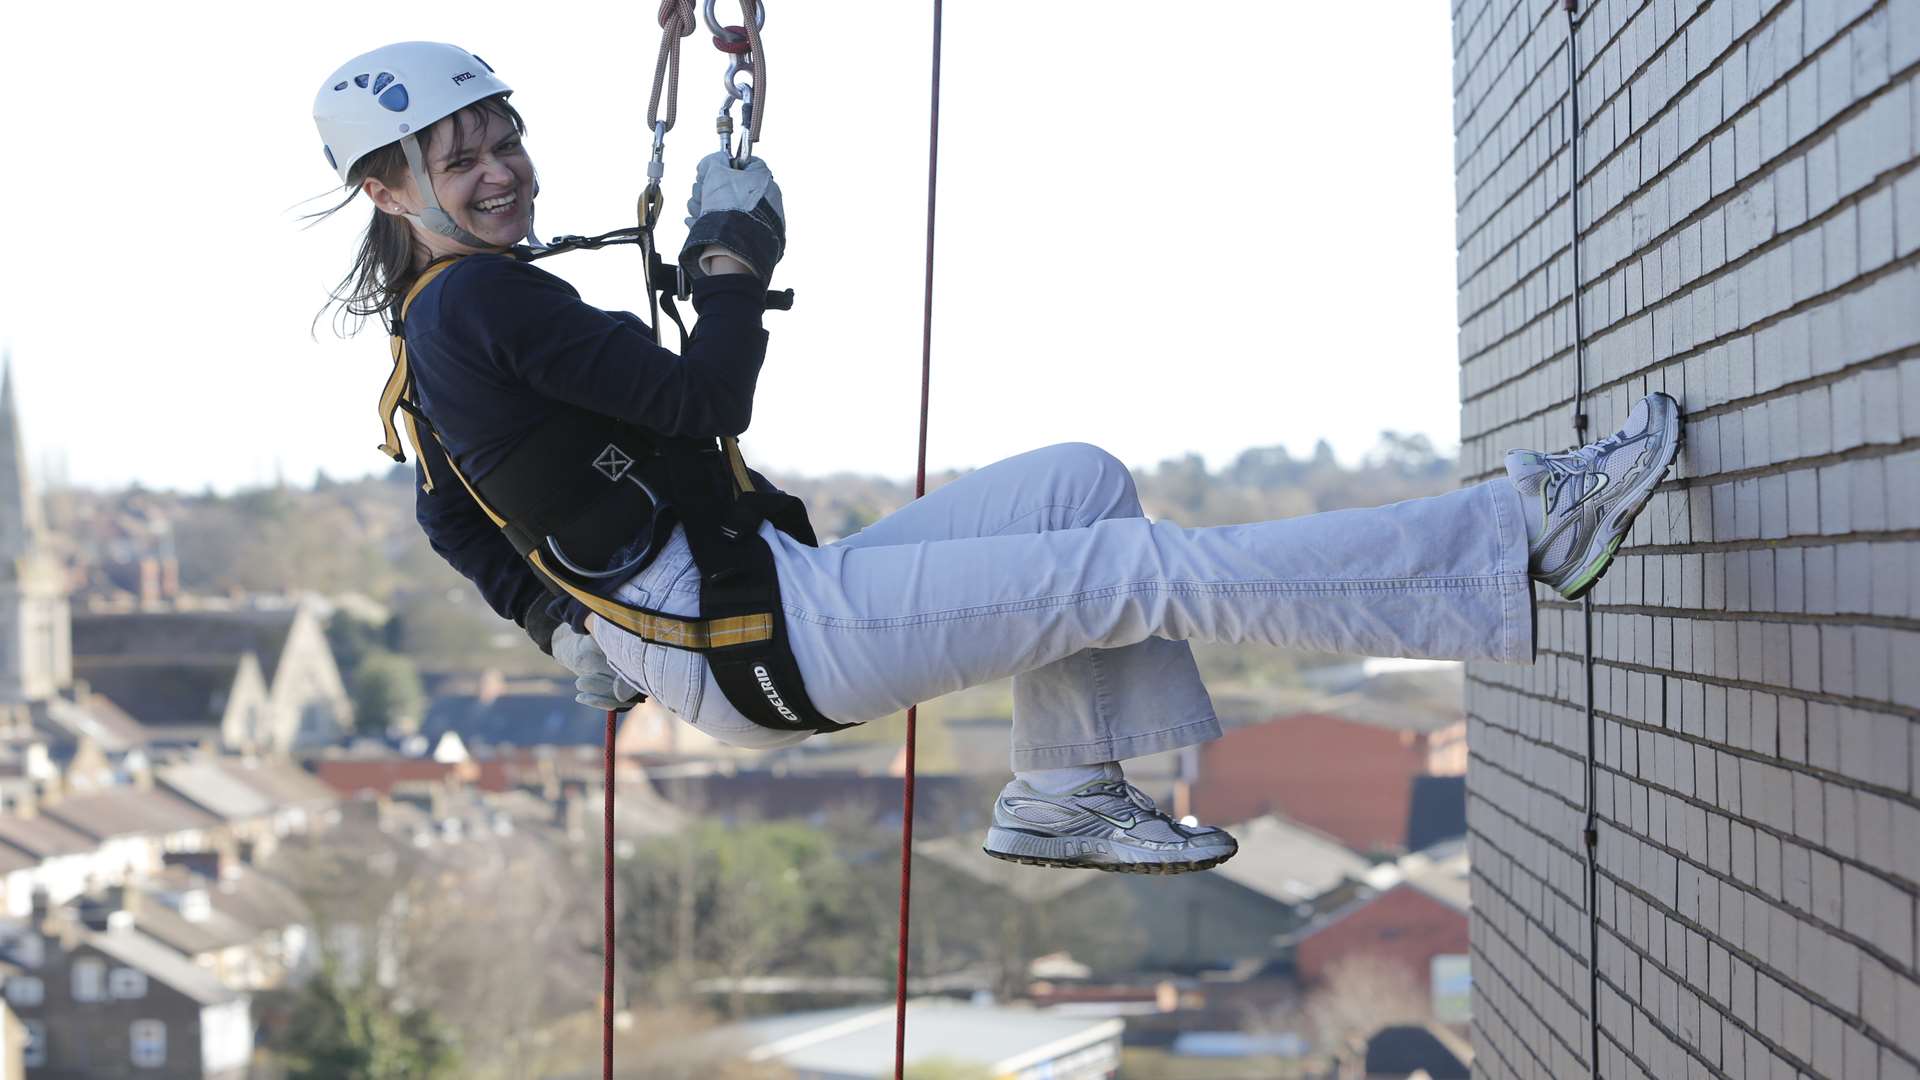 Ann-Marie Langley taking part in the KM Maidstone Abseil Challenge. Booking is now open for this year's event staged at Midhurst Court on Sunday, June 5.